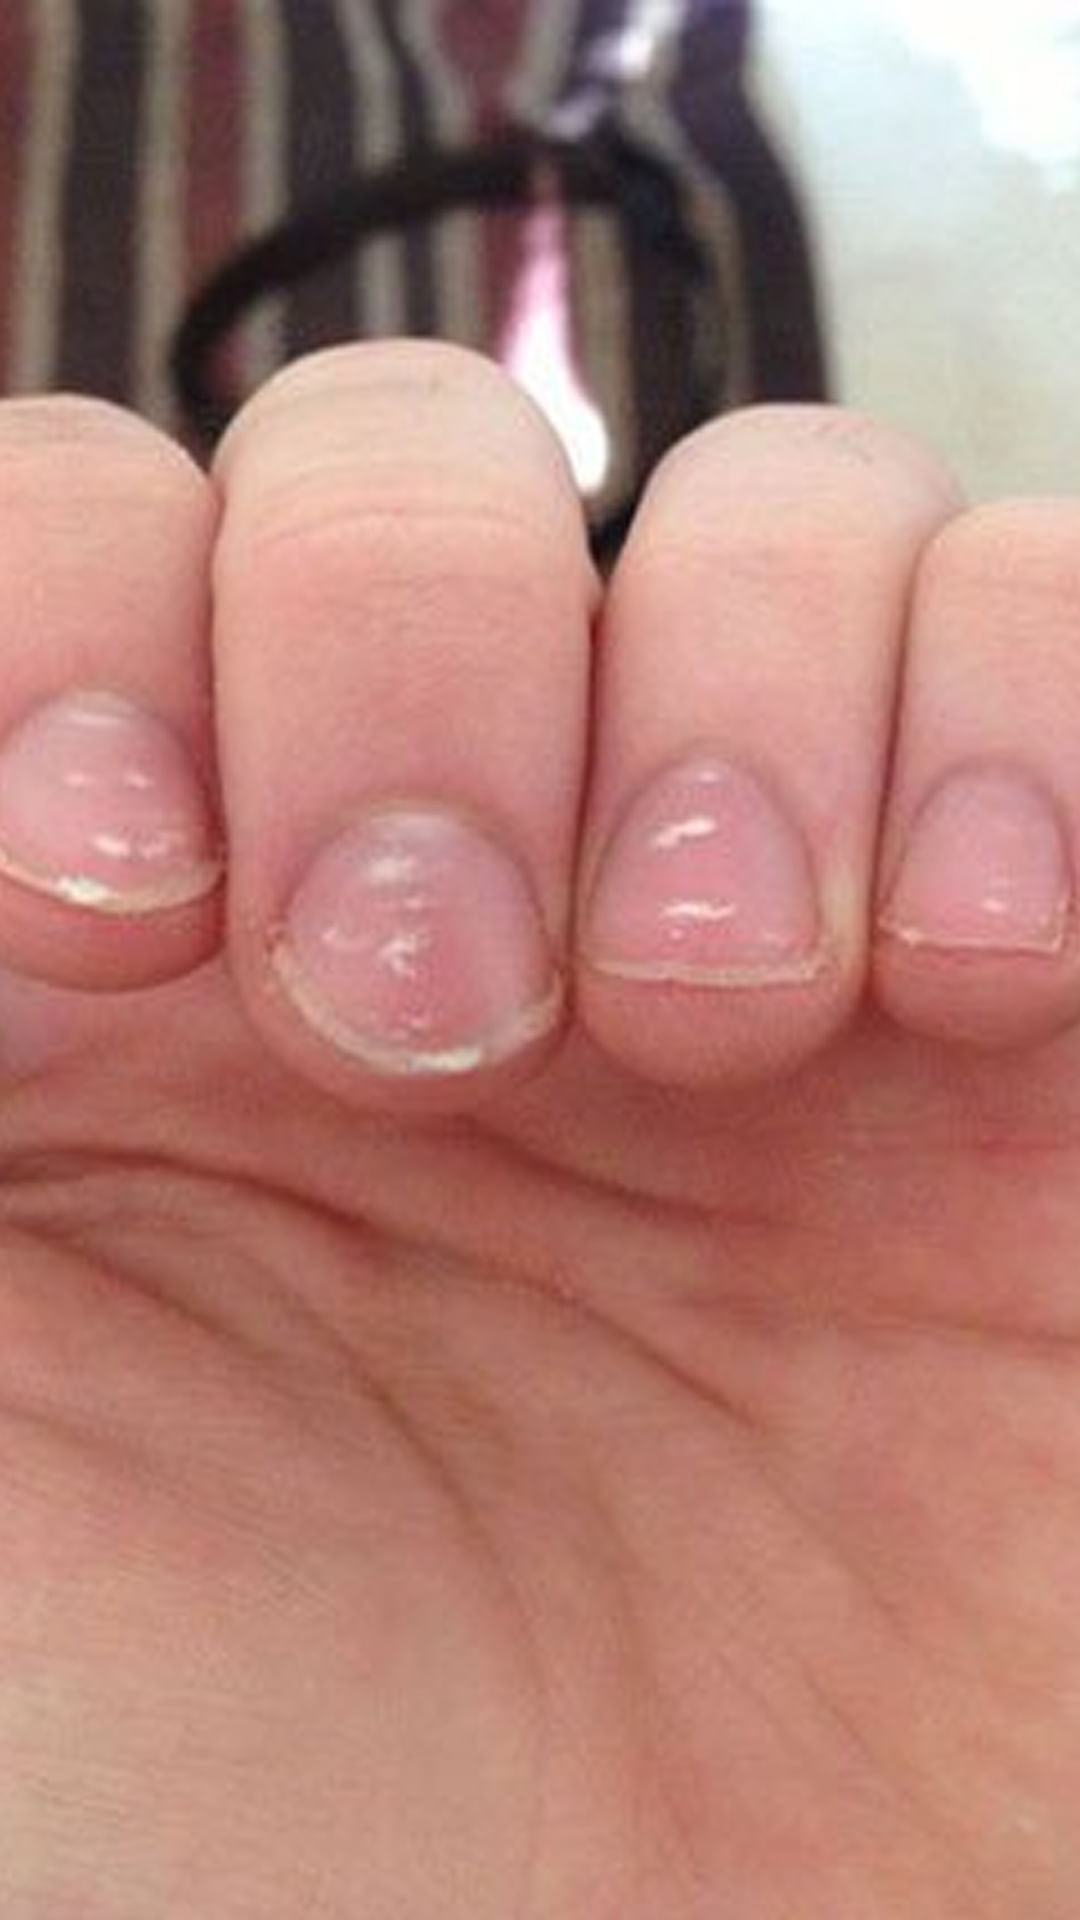 White Spots On Your Child's Nail – Should You Be Worried?